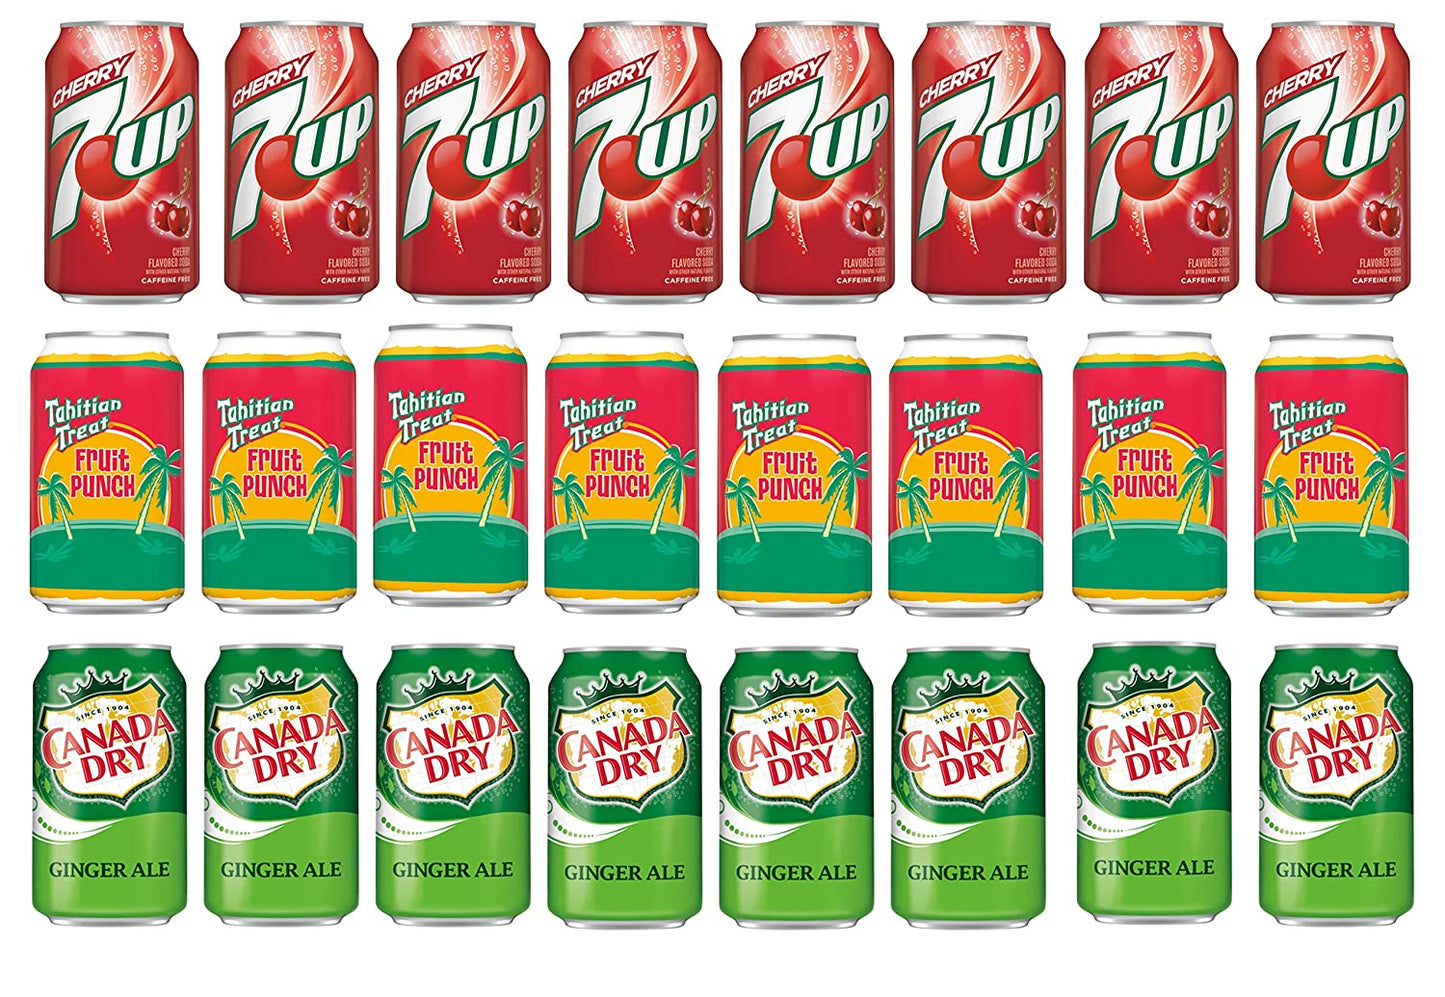 Variety Soda Pack, Pack of 24, 12 fl oz, 7UP Cherry, Tahitian Treat Fruit Punch Soda, Canada Dry Ginger Ale